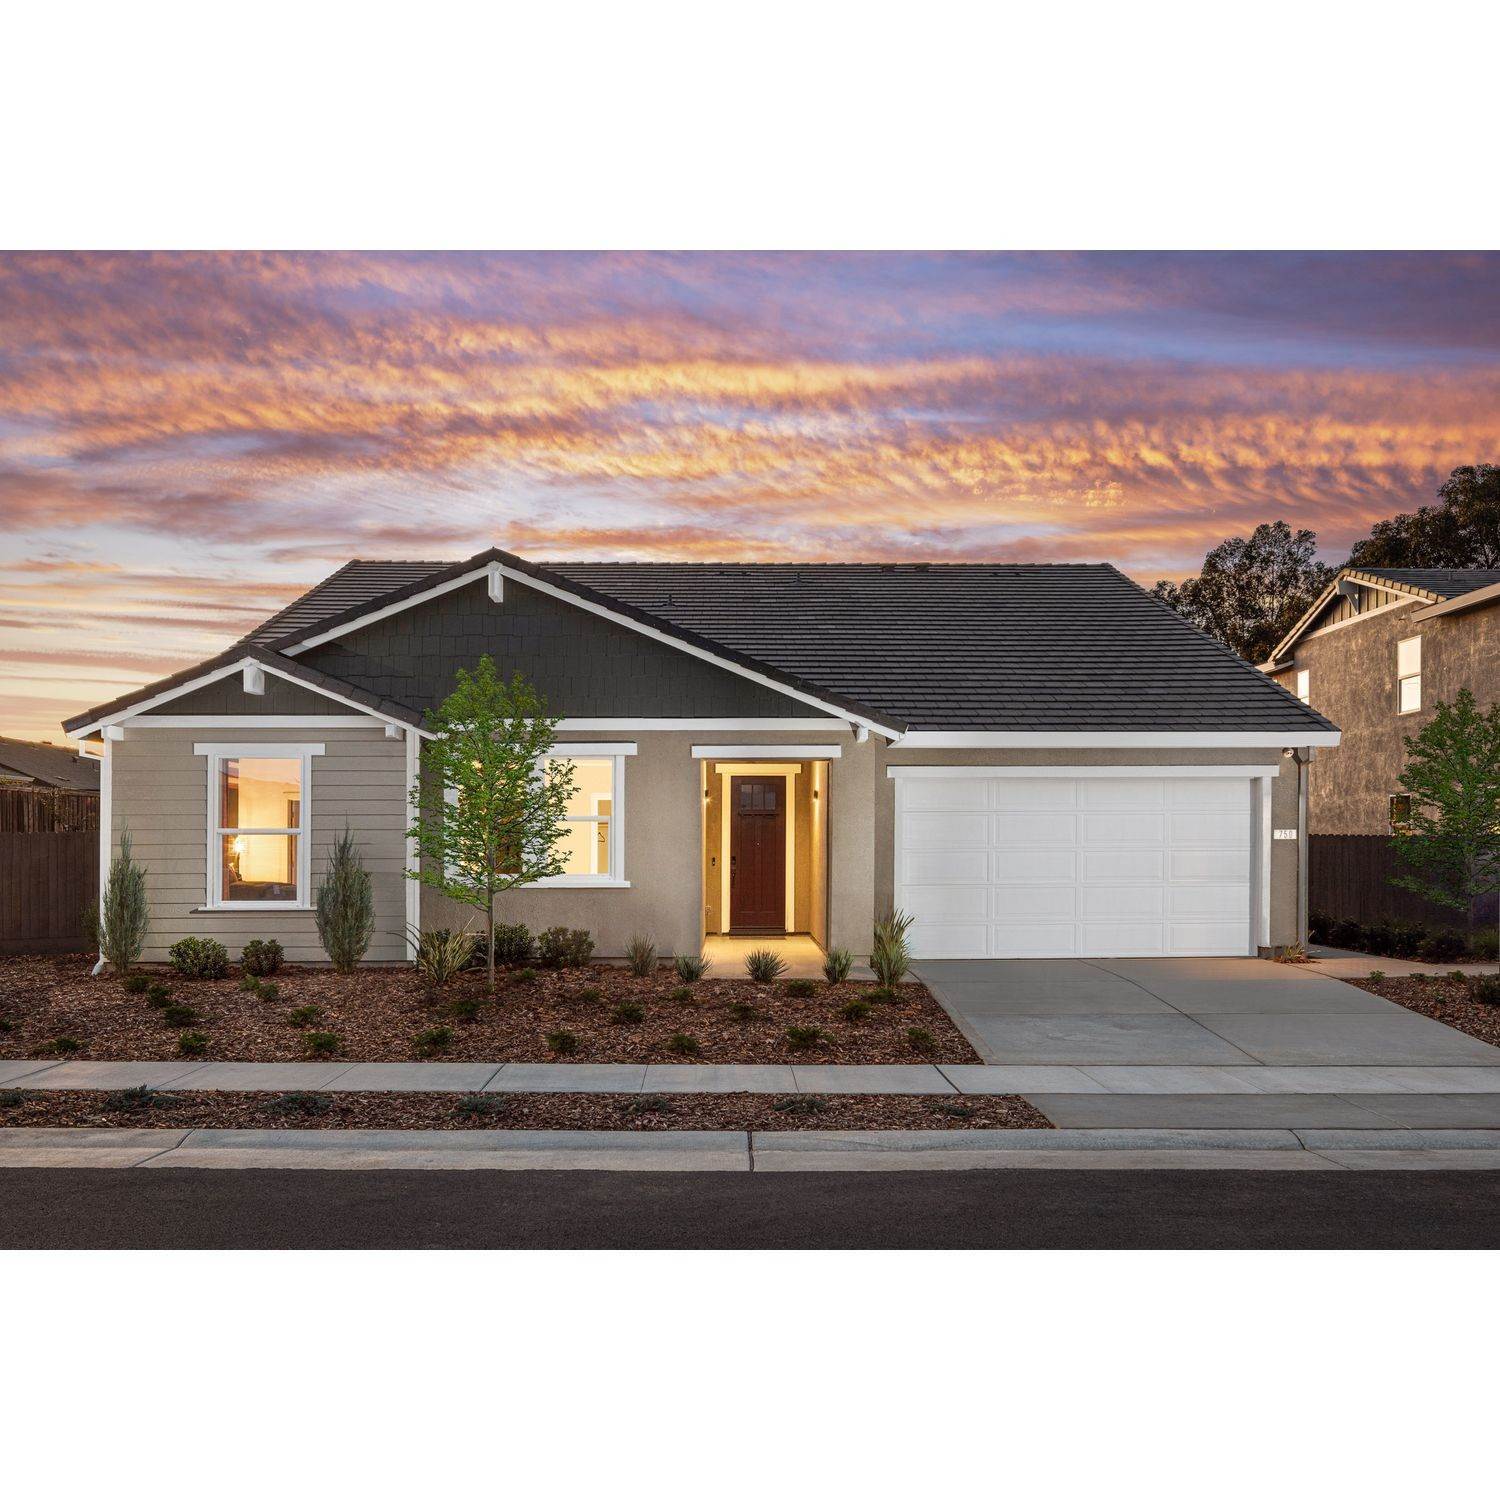 38. Cresleigh Havenwood xây dựng tại 758 Havenwood Drive, Lincoln, CA 95648